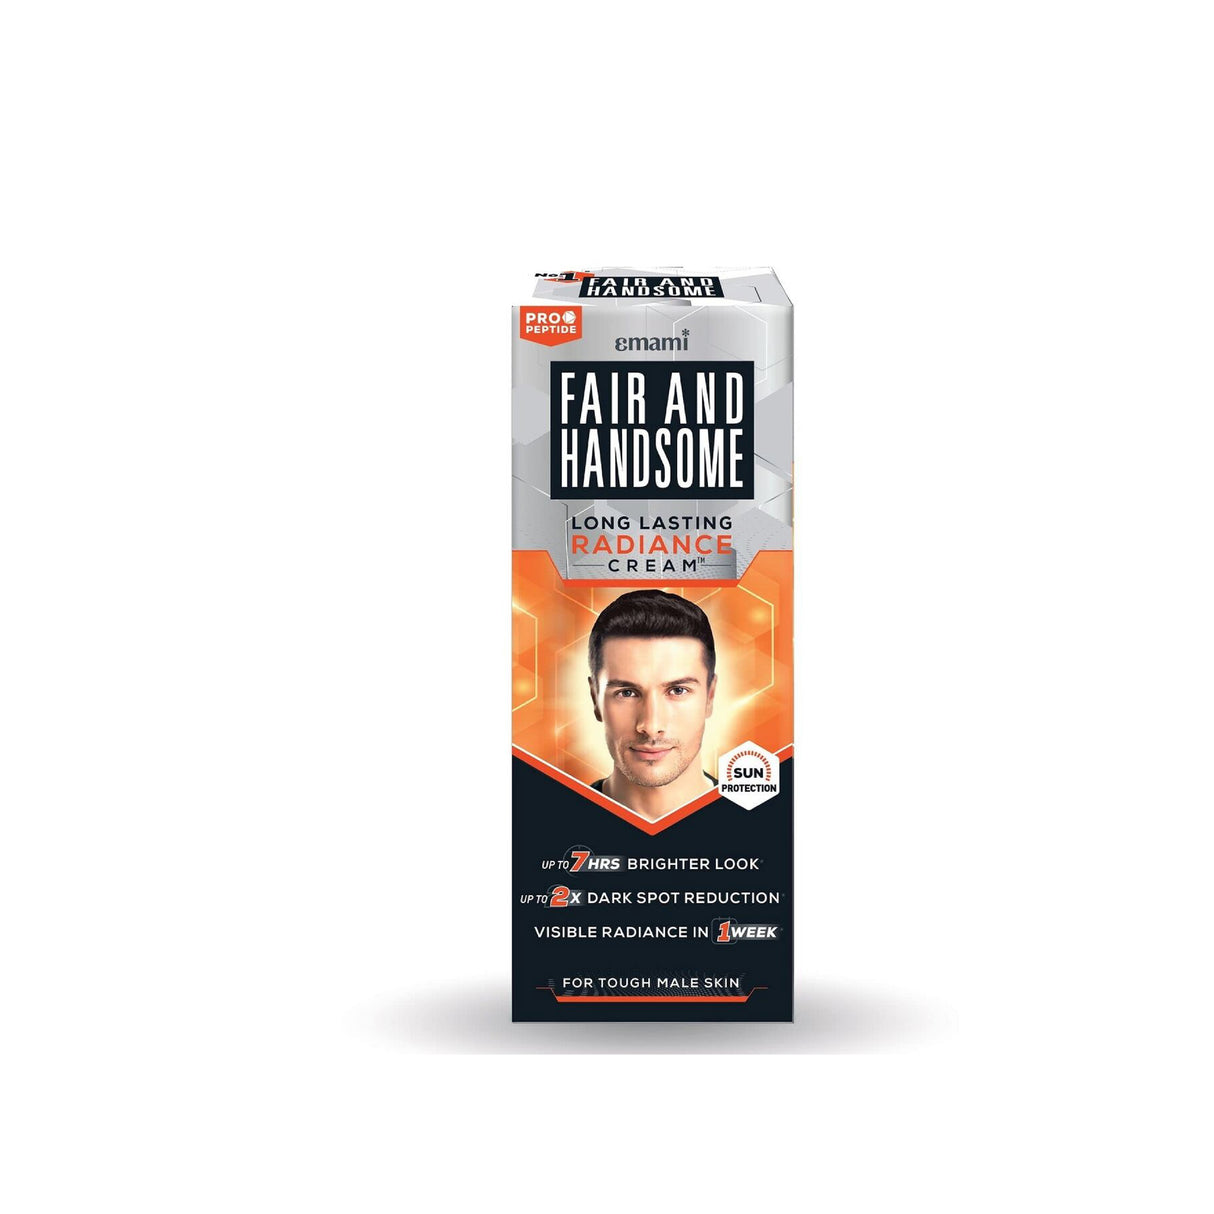 Fair And Handsome Long Lasting Radiance Cream